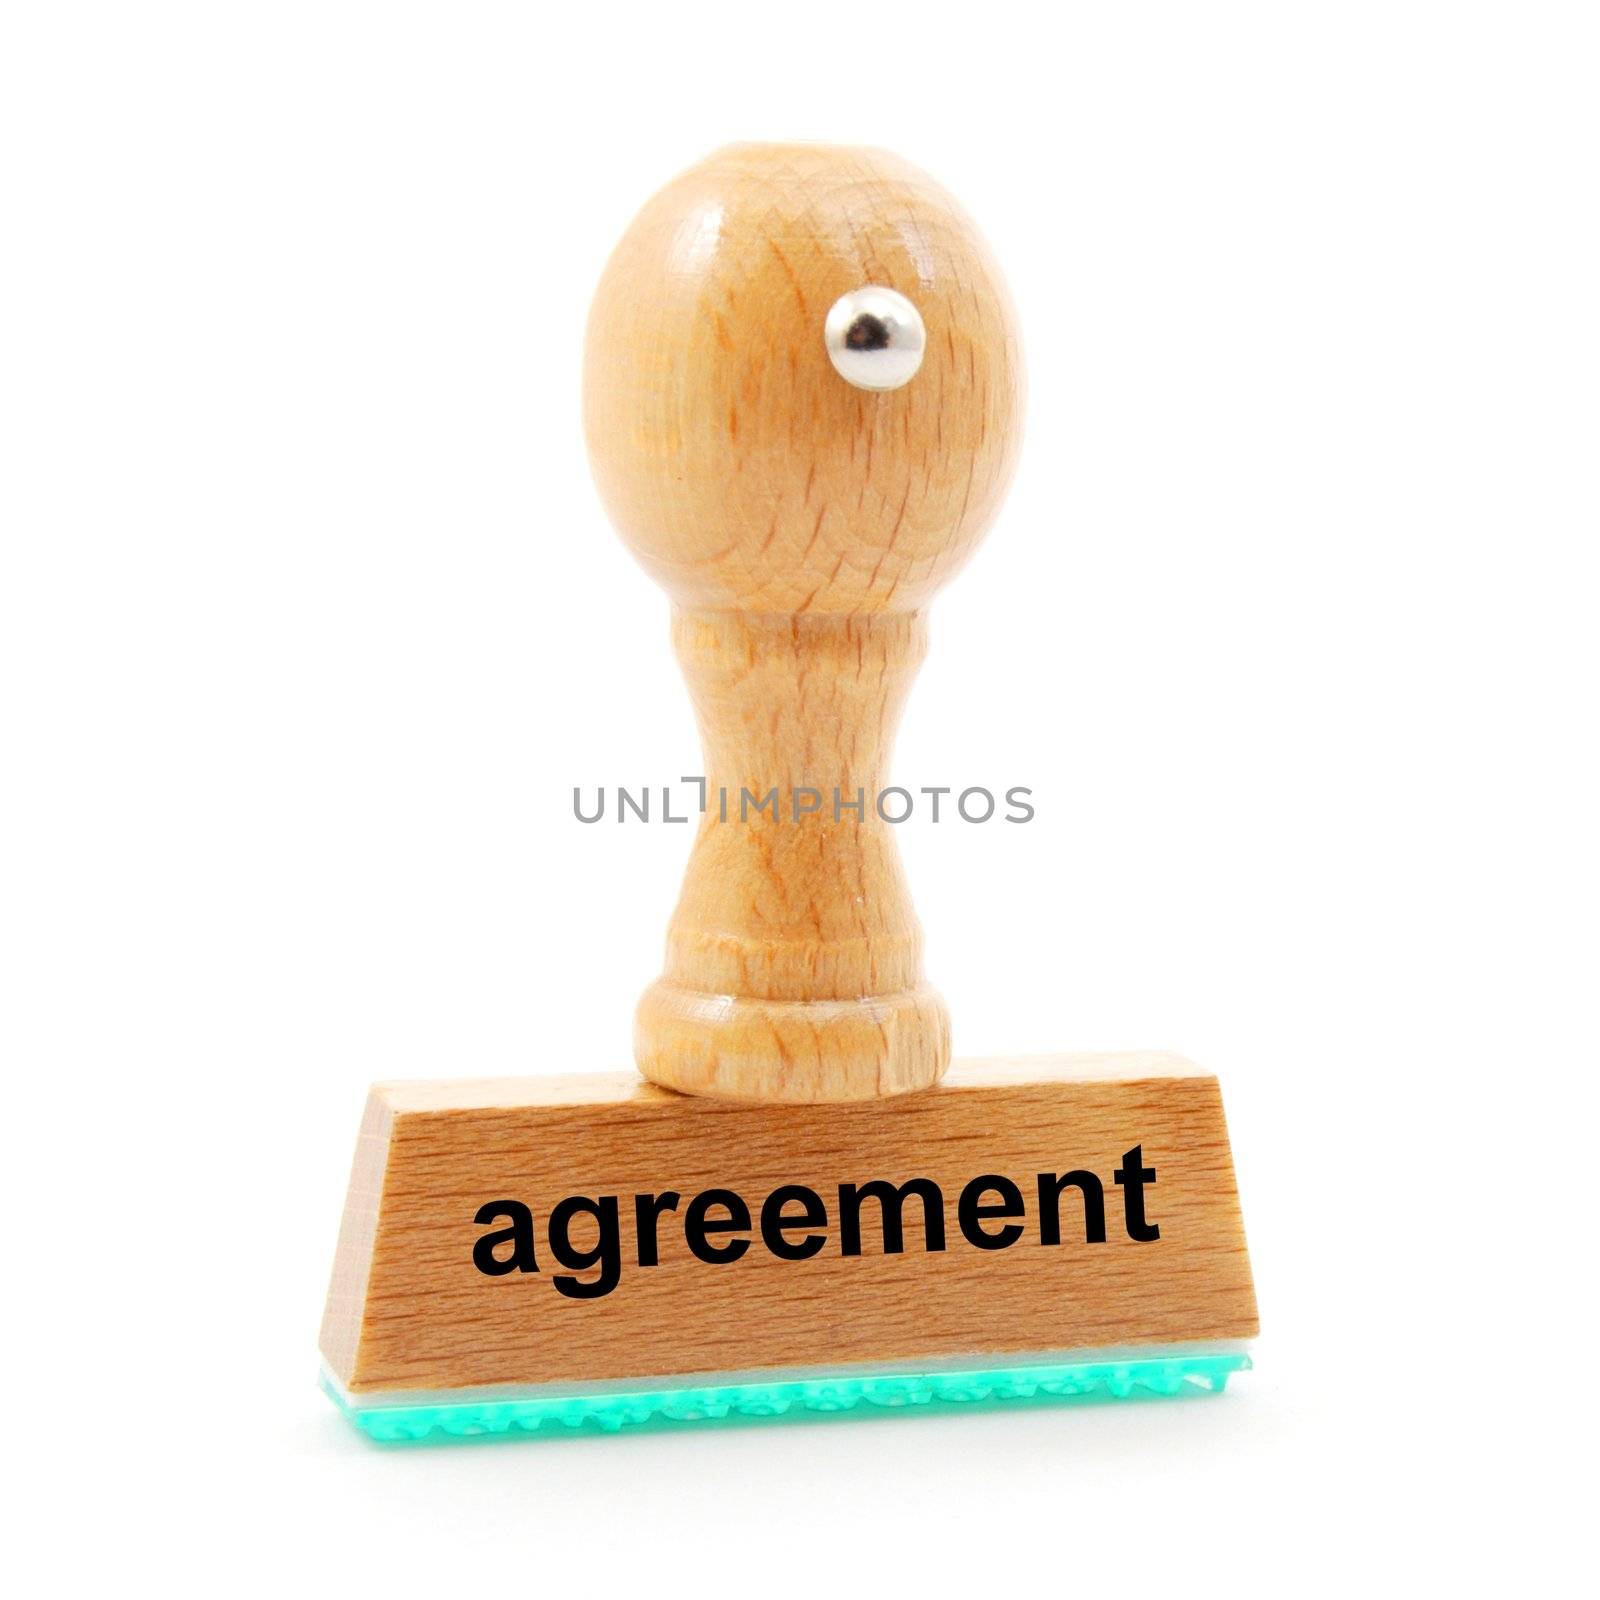 agreement or business deal concept with stamp in office